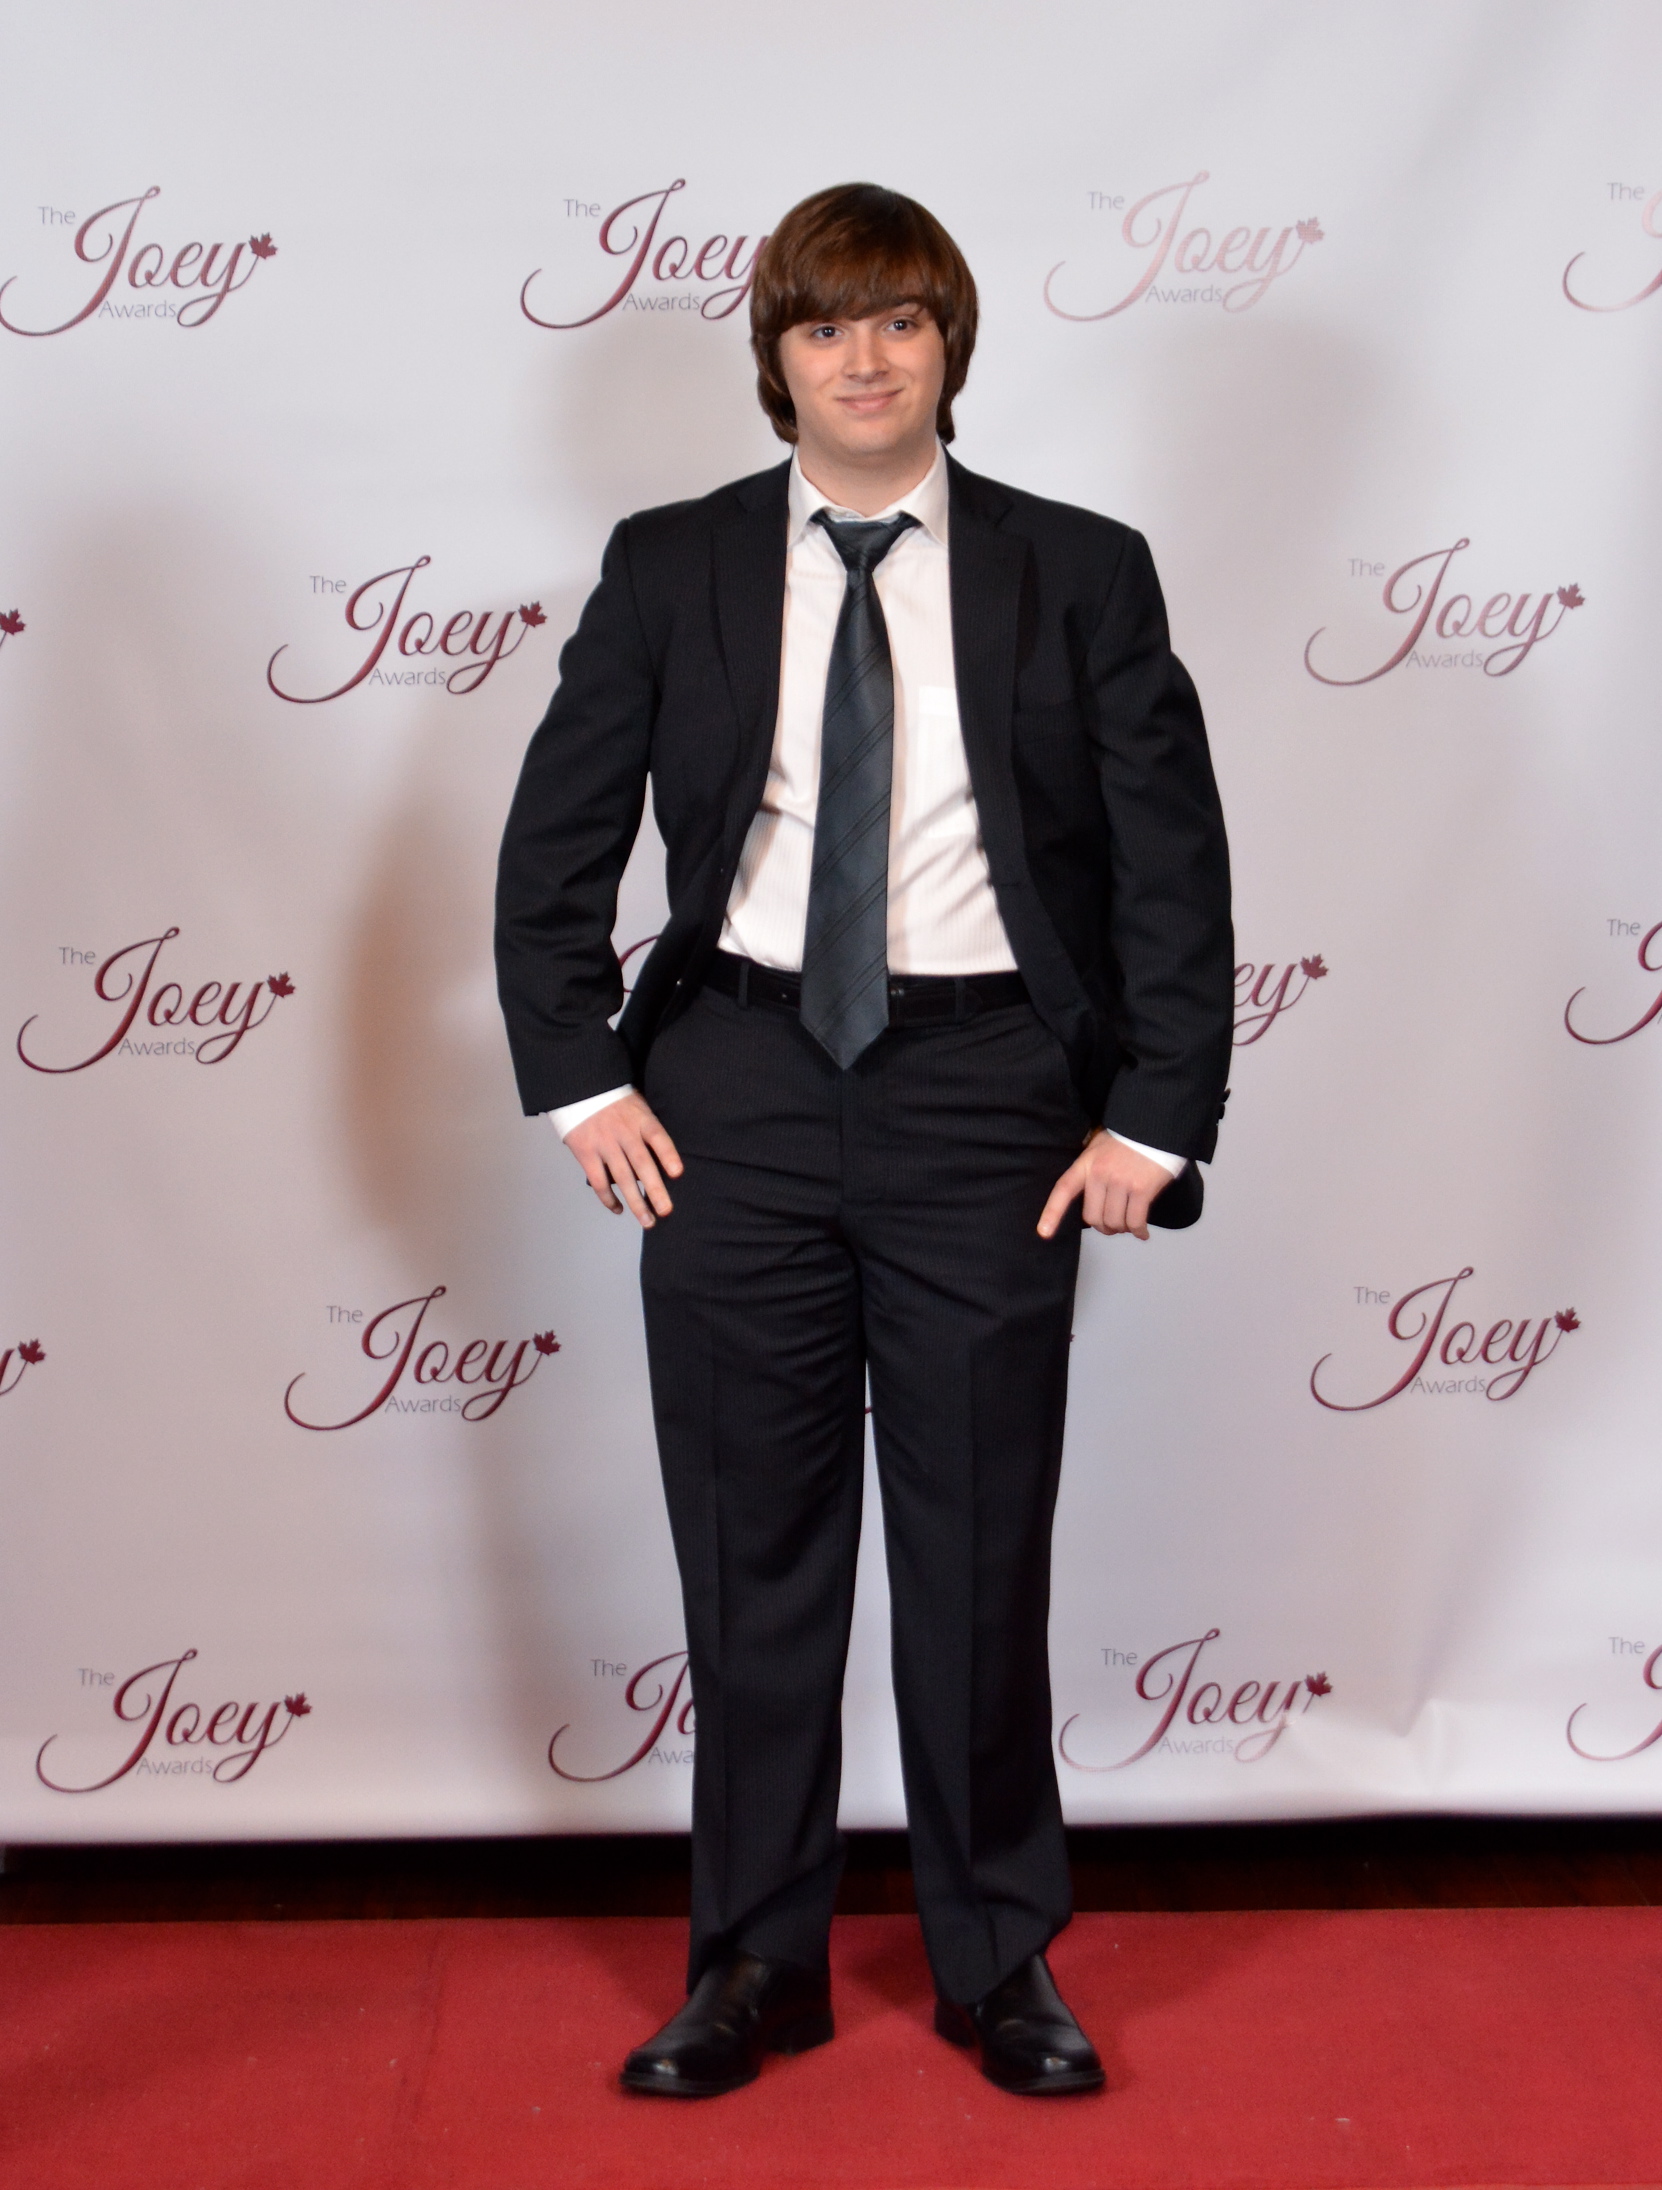 Mark on the red carpet at the 2014 Joey Awards in Vancouver